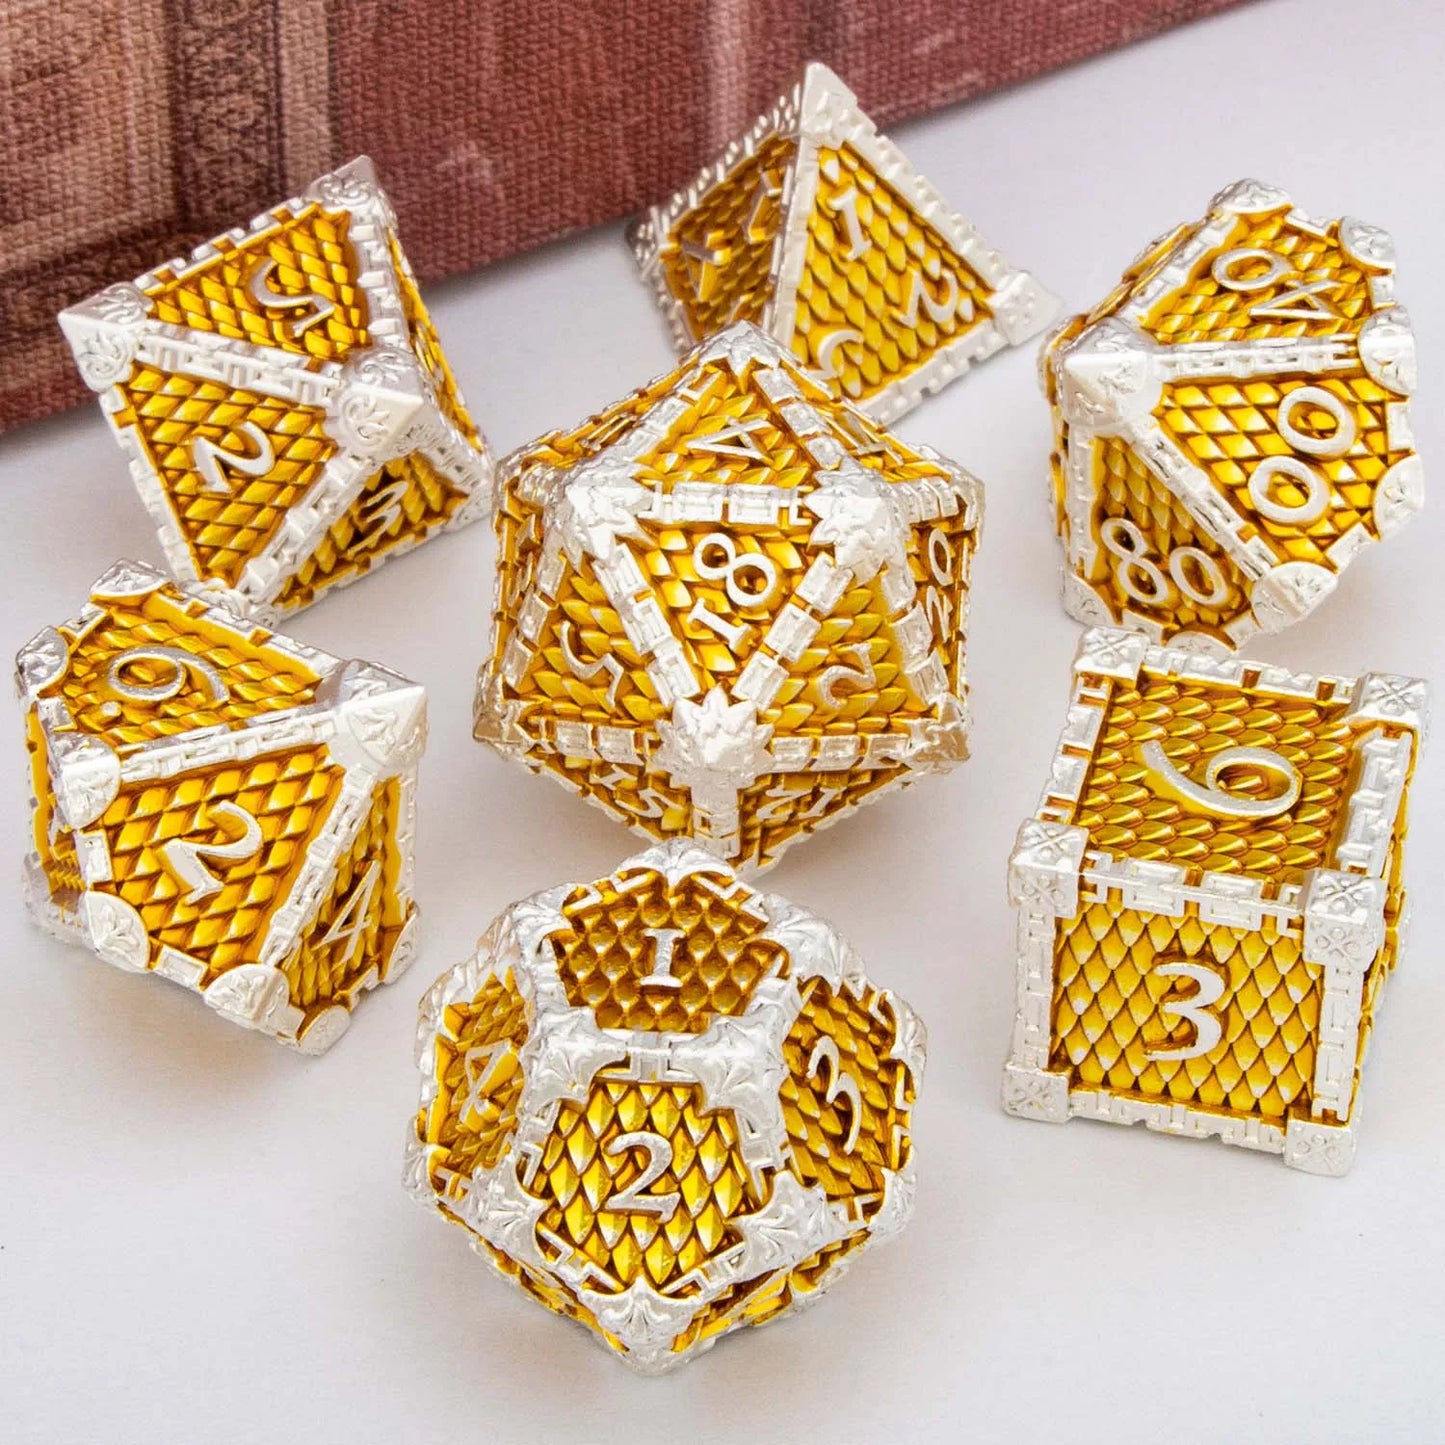 DND Metal Dice Set Dragon Scale Blood D&D Dice Dungeon and Dragon Role Playing Games Polyhedral Dice RPG D and D Dice Silver Yellow